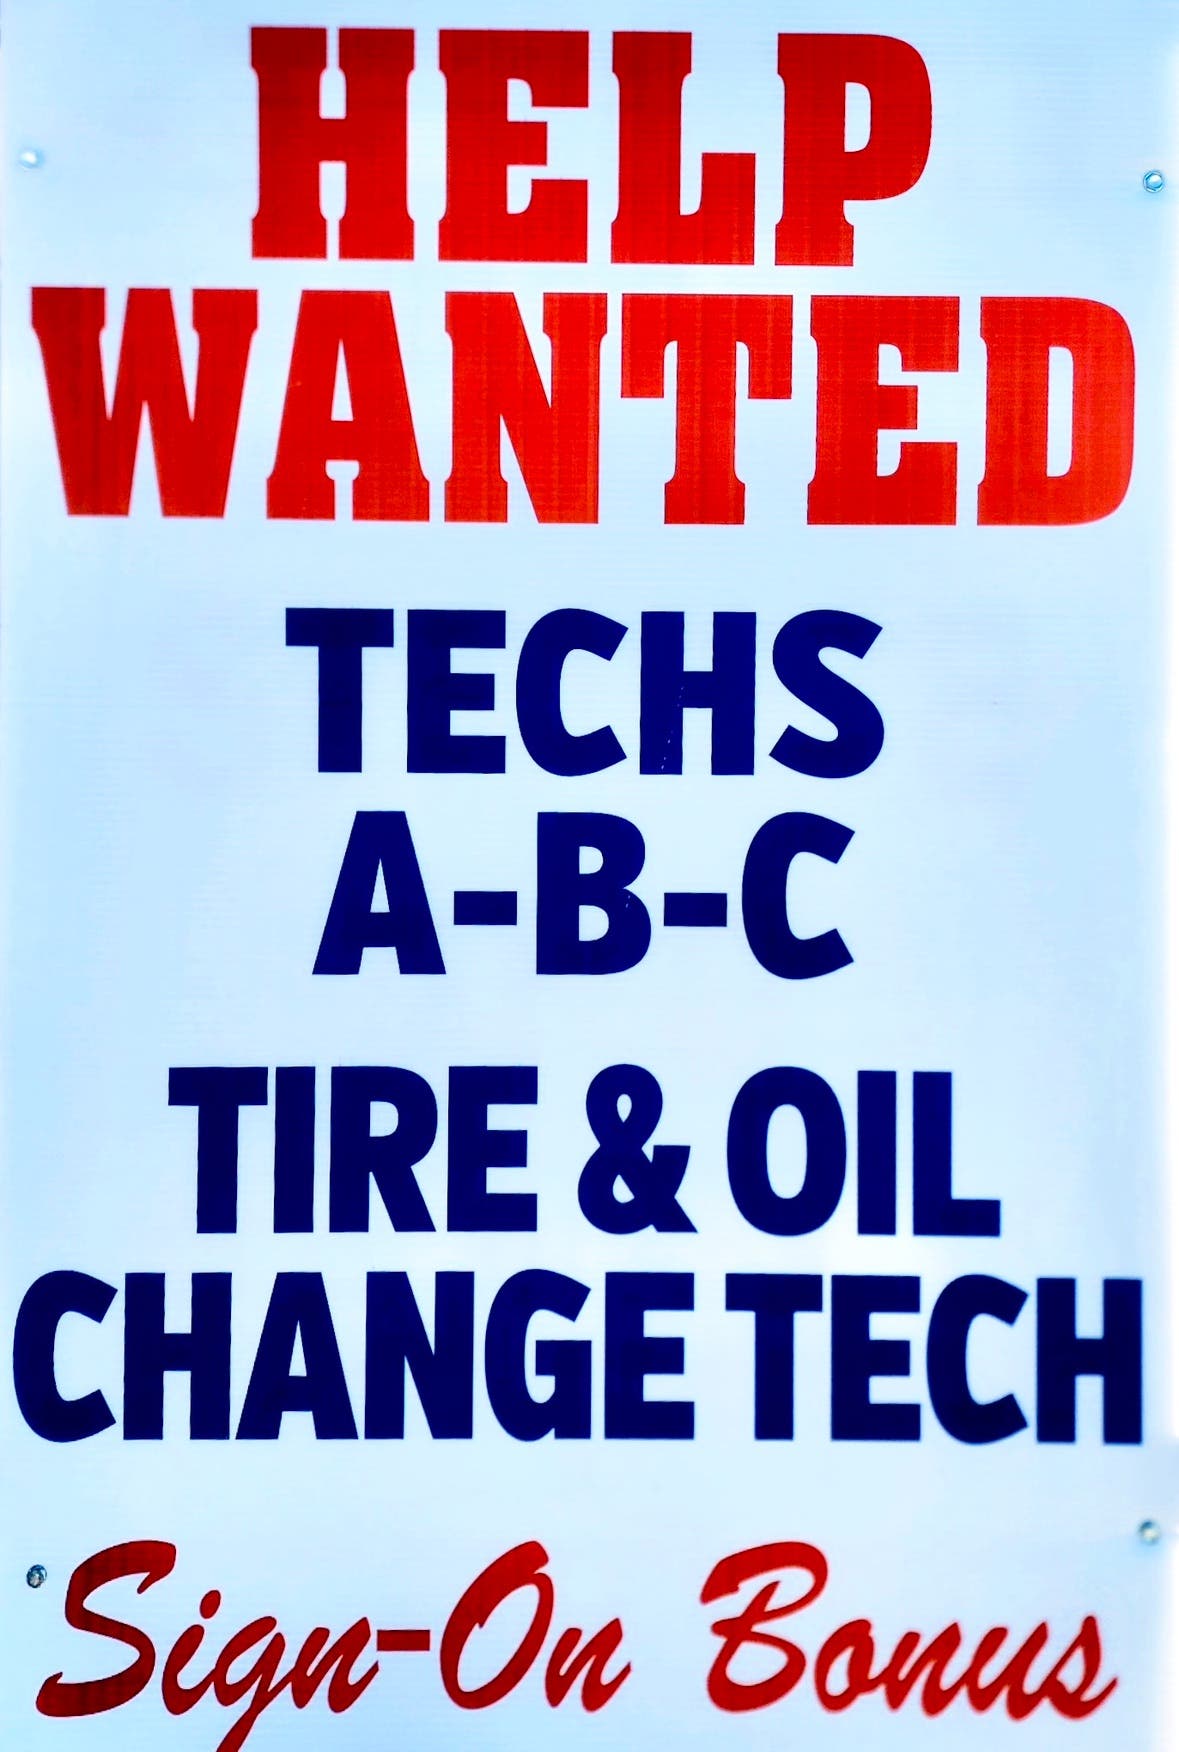 Automotive Techs Wanted - All Levels 